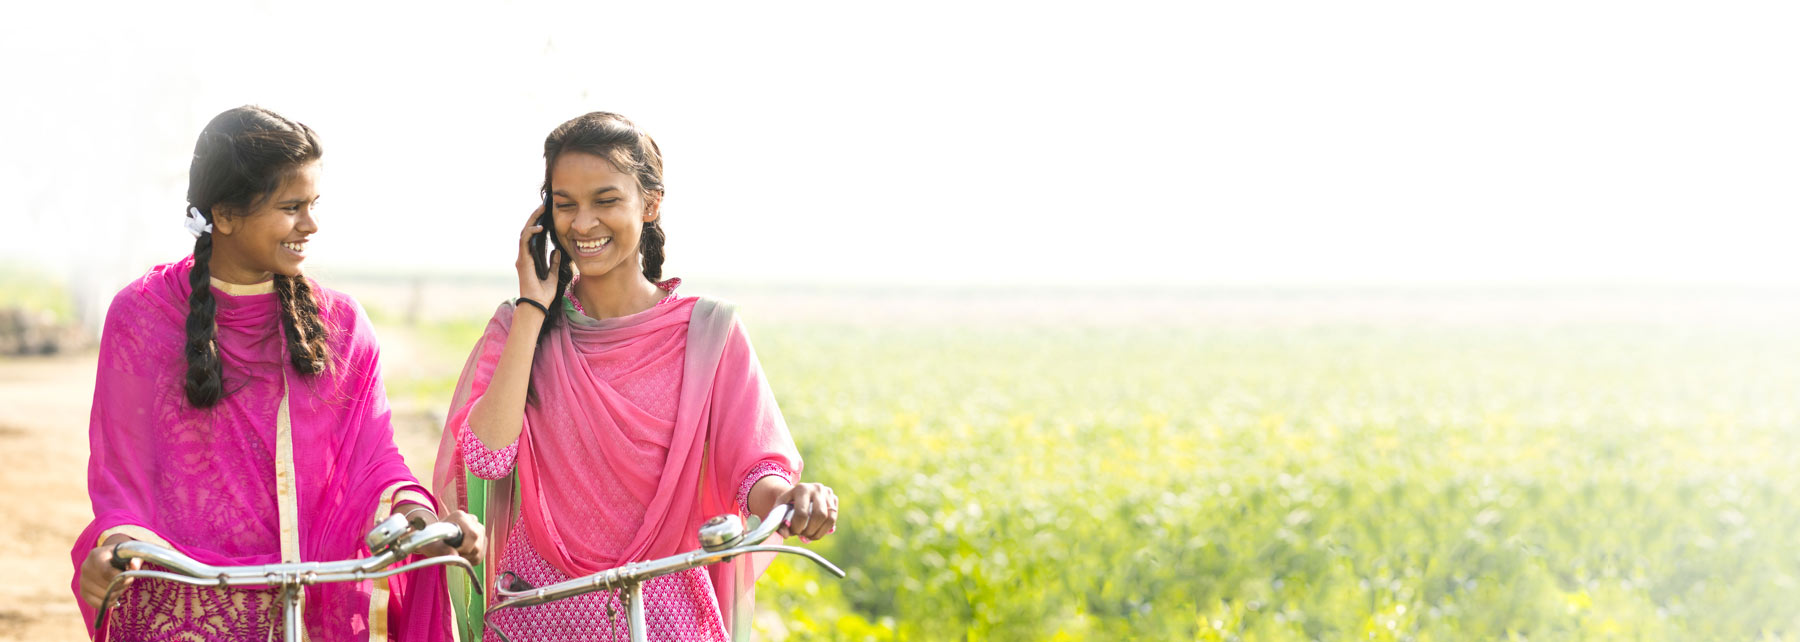 Two Indian Girls Talking on Bicycles